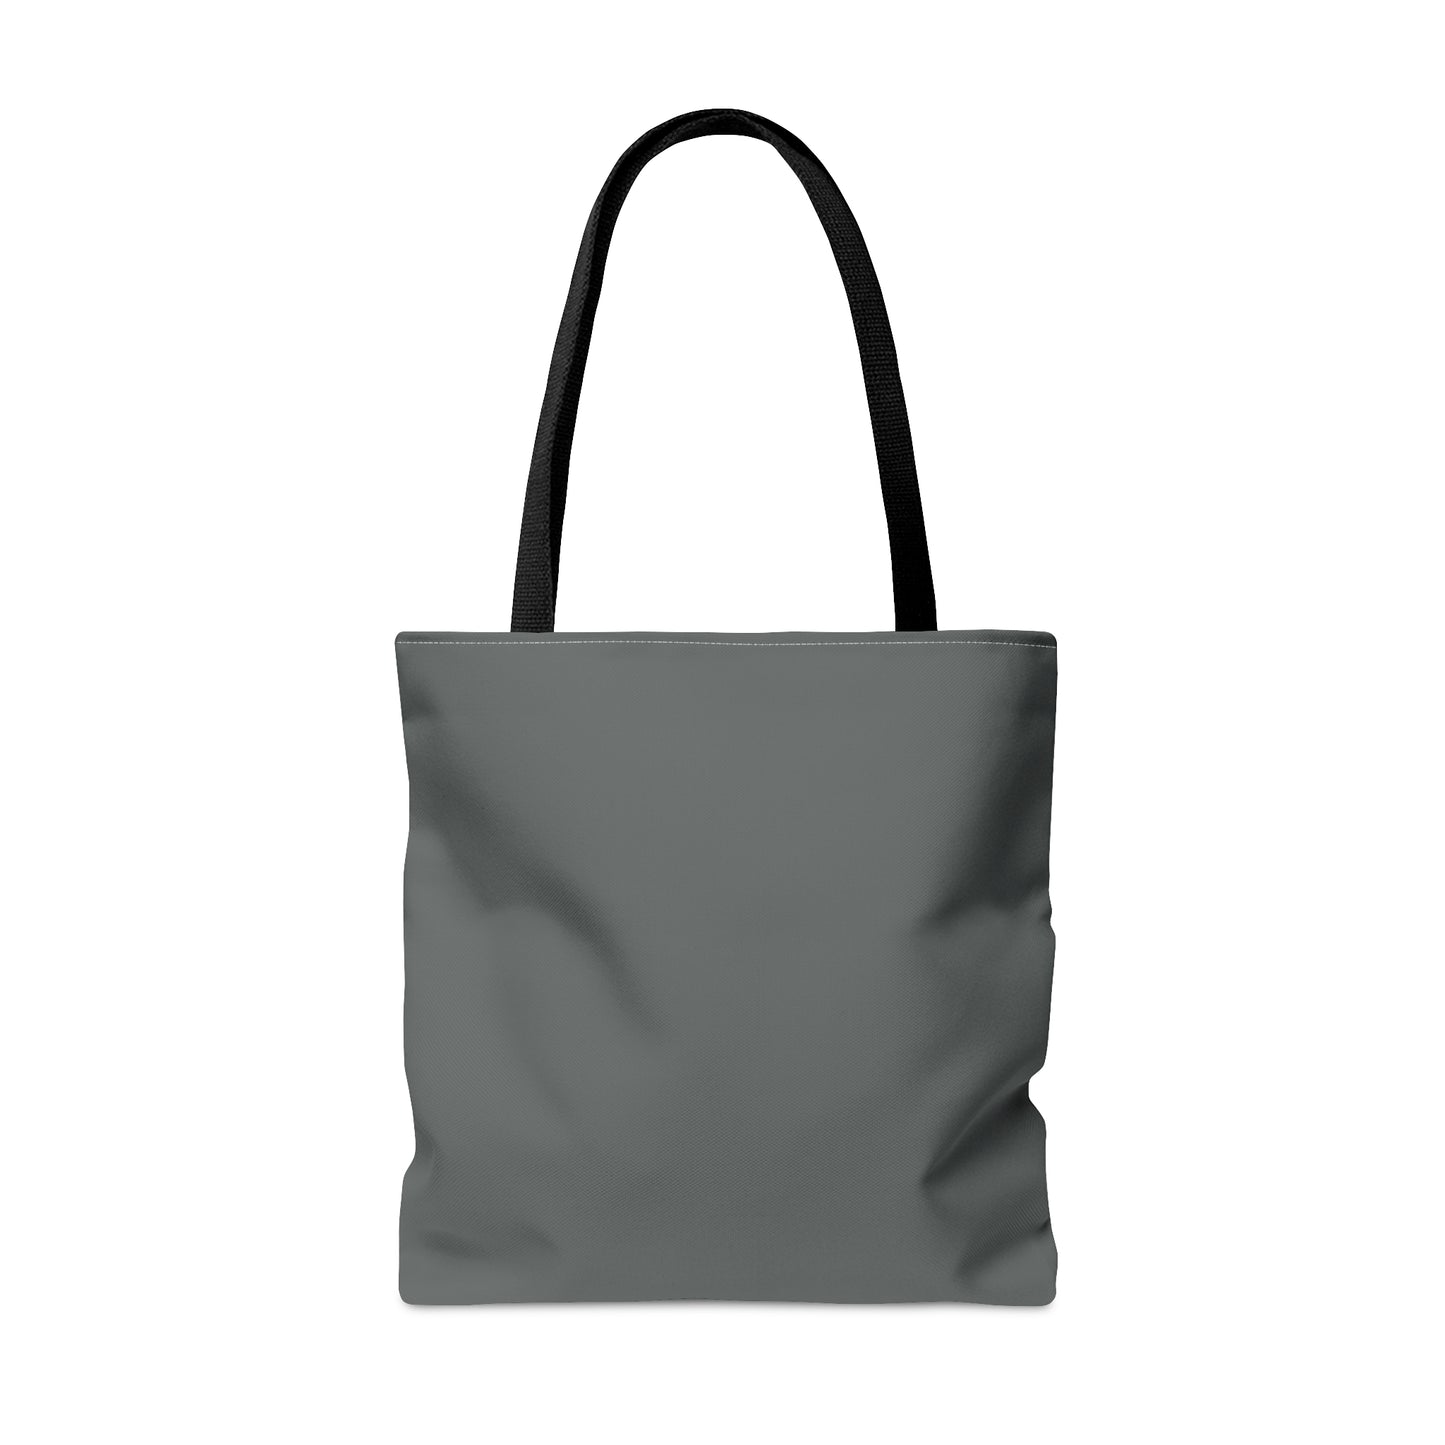 Created For This Season, Volleyball, Tote Bag